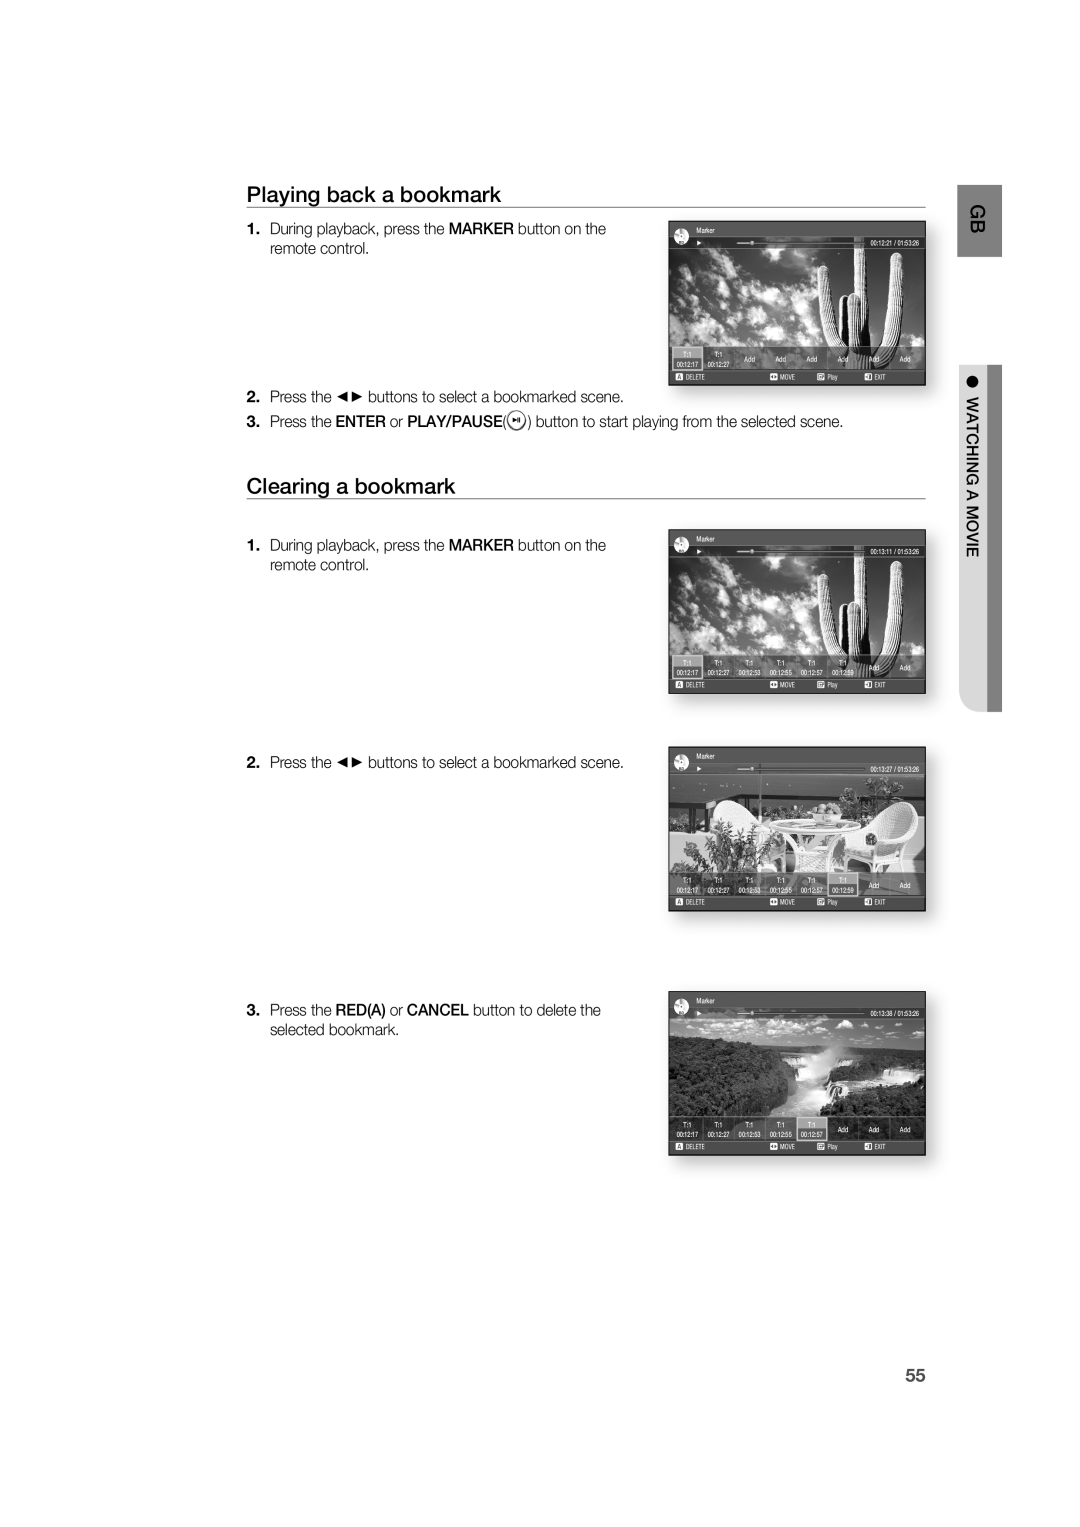 Samsung AH68-02019K manual Playing back a bookmark, Clearing a bookmark, Press the buttons to select a bookmarked scene 